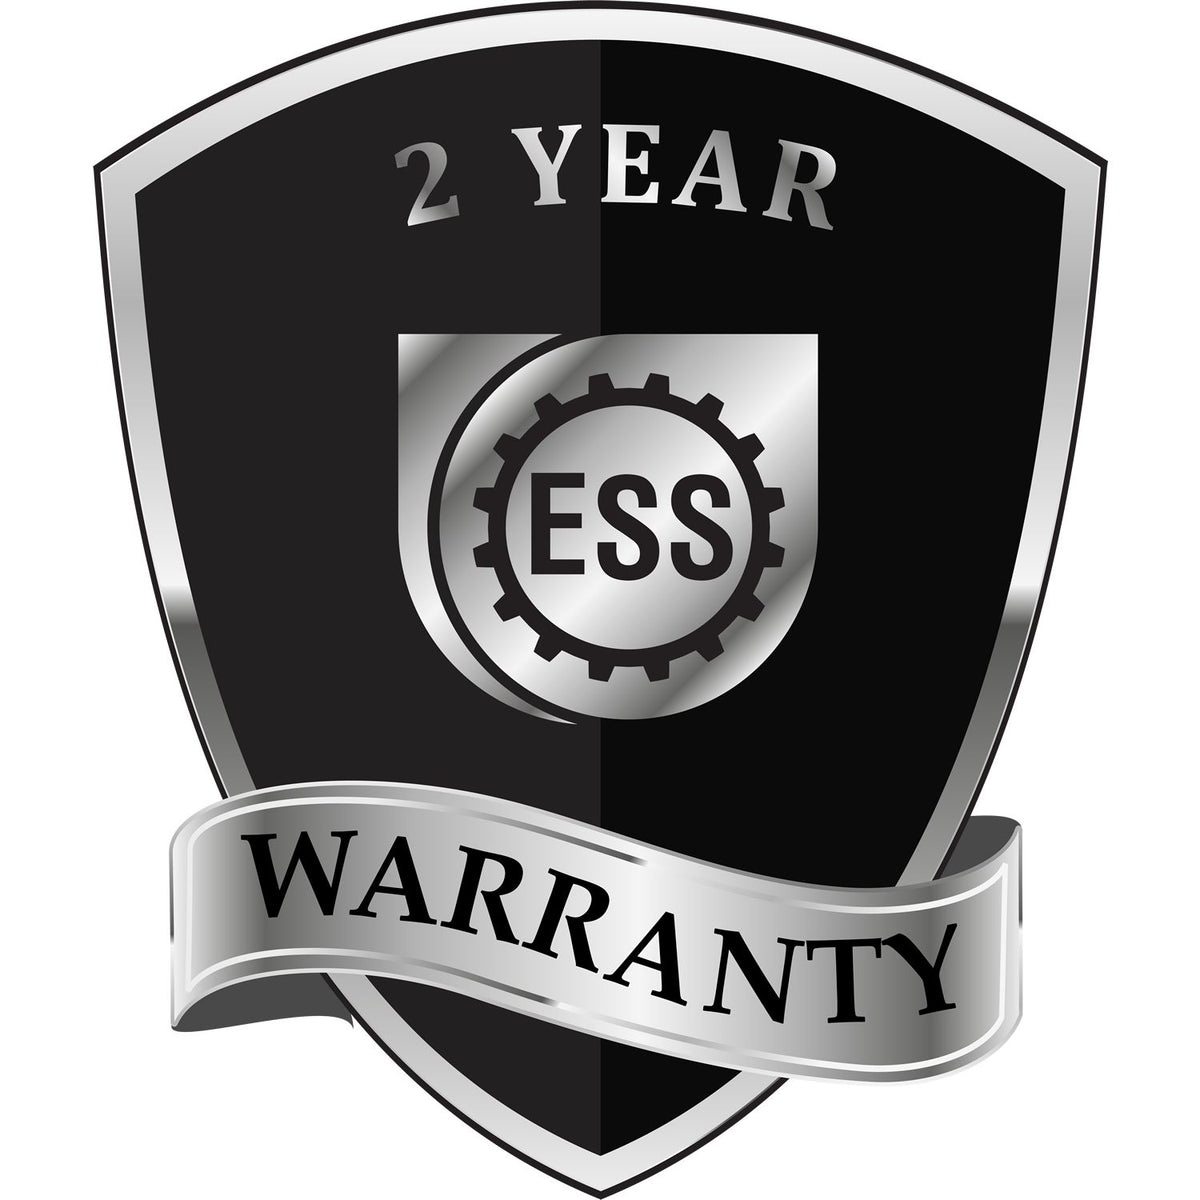 A badge or emblem showing a warranty icon for the Pennsylvania Desk Architect Embossing Seal